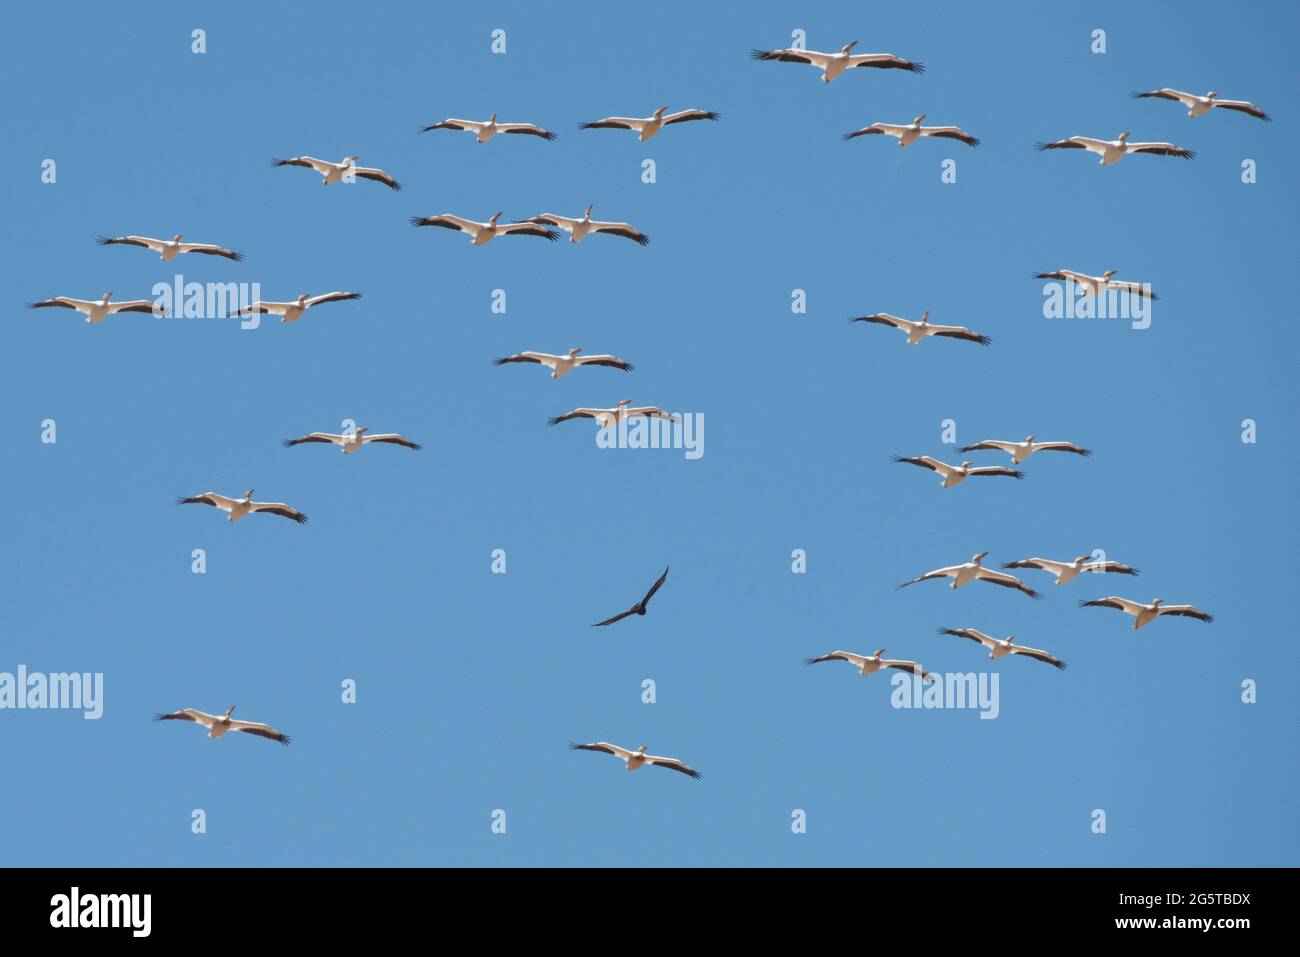 White pelicans (Pelecanus erythrorhynchos) in flight and migrating over California's central valley as a hawk passes below. Stock Photo